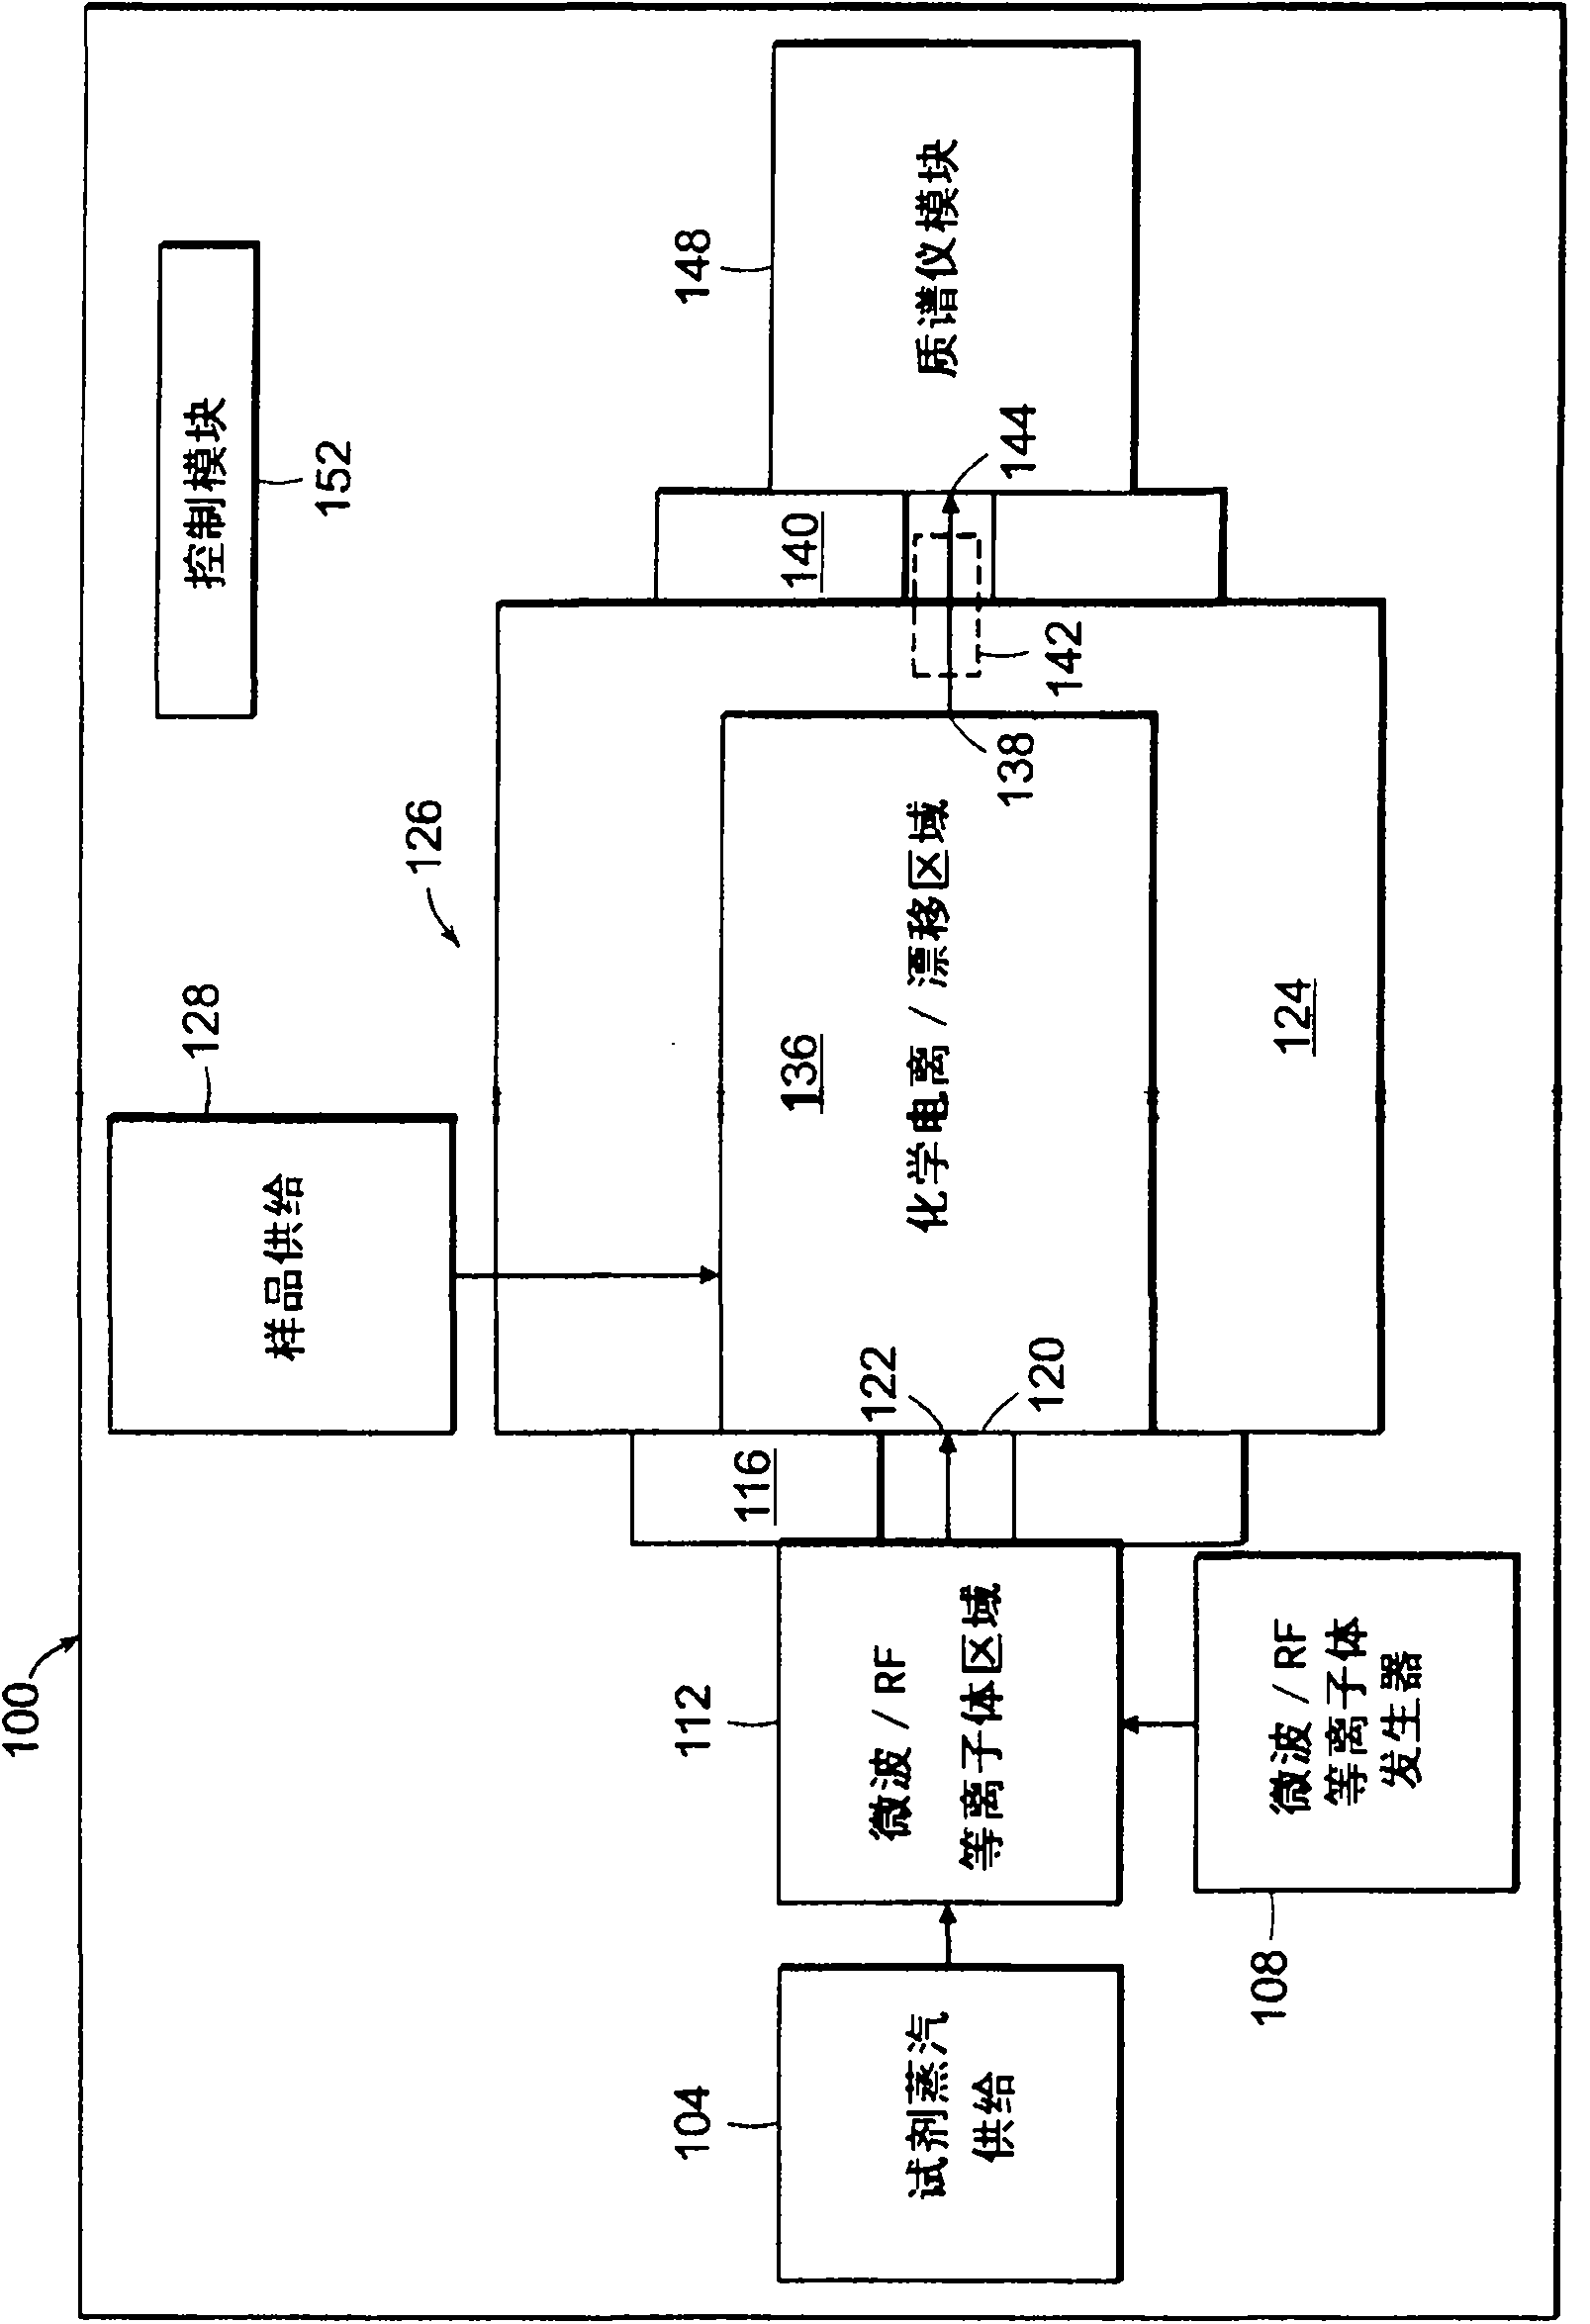 Chemical ionization reaction or proton transfer reaction mass spectrometry with a quadrupole or time-of-flight mass spectrometer